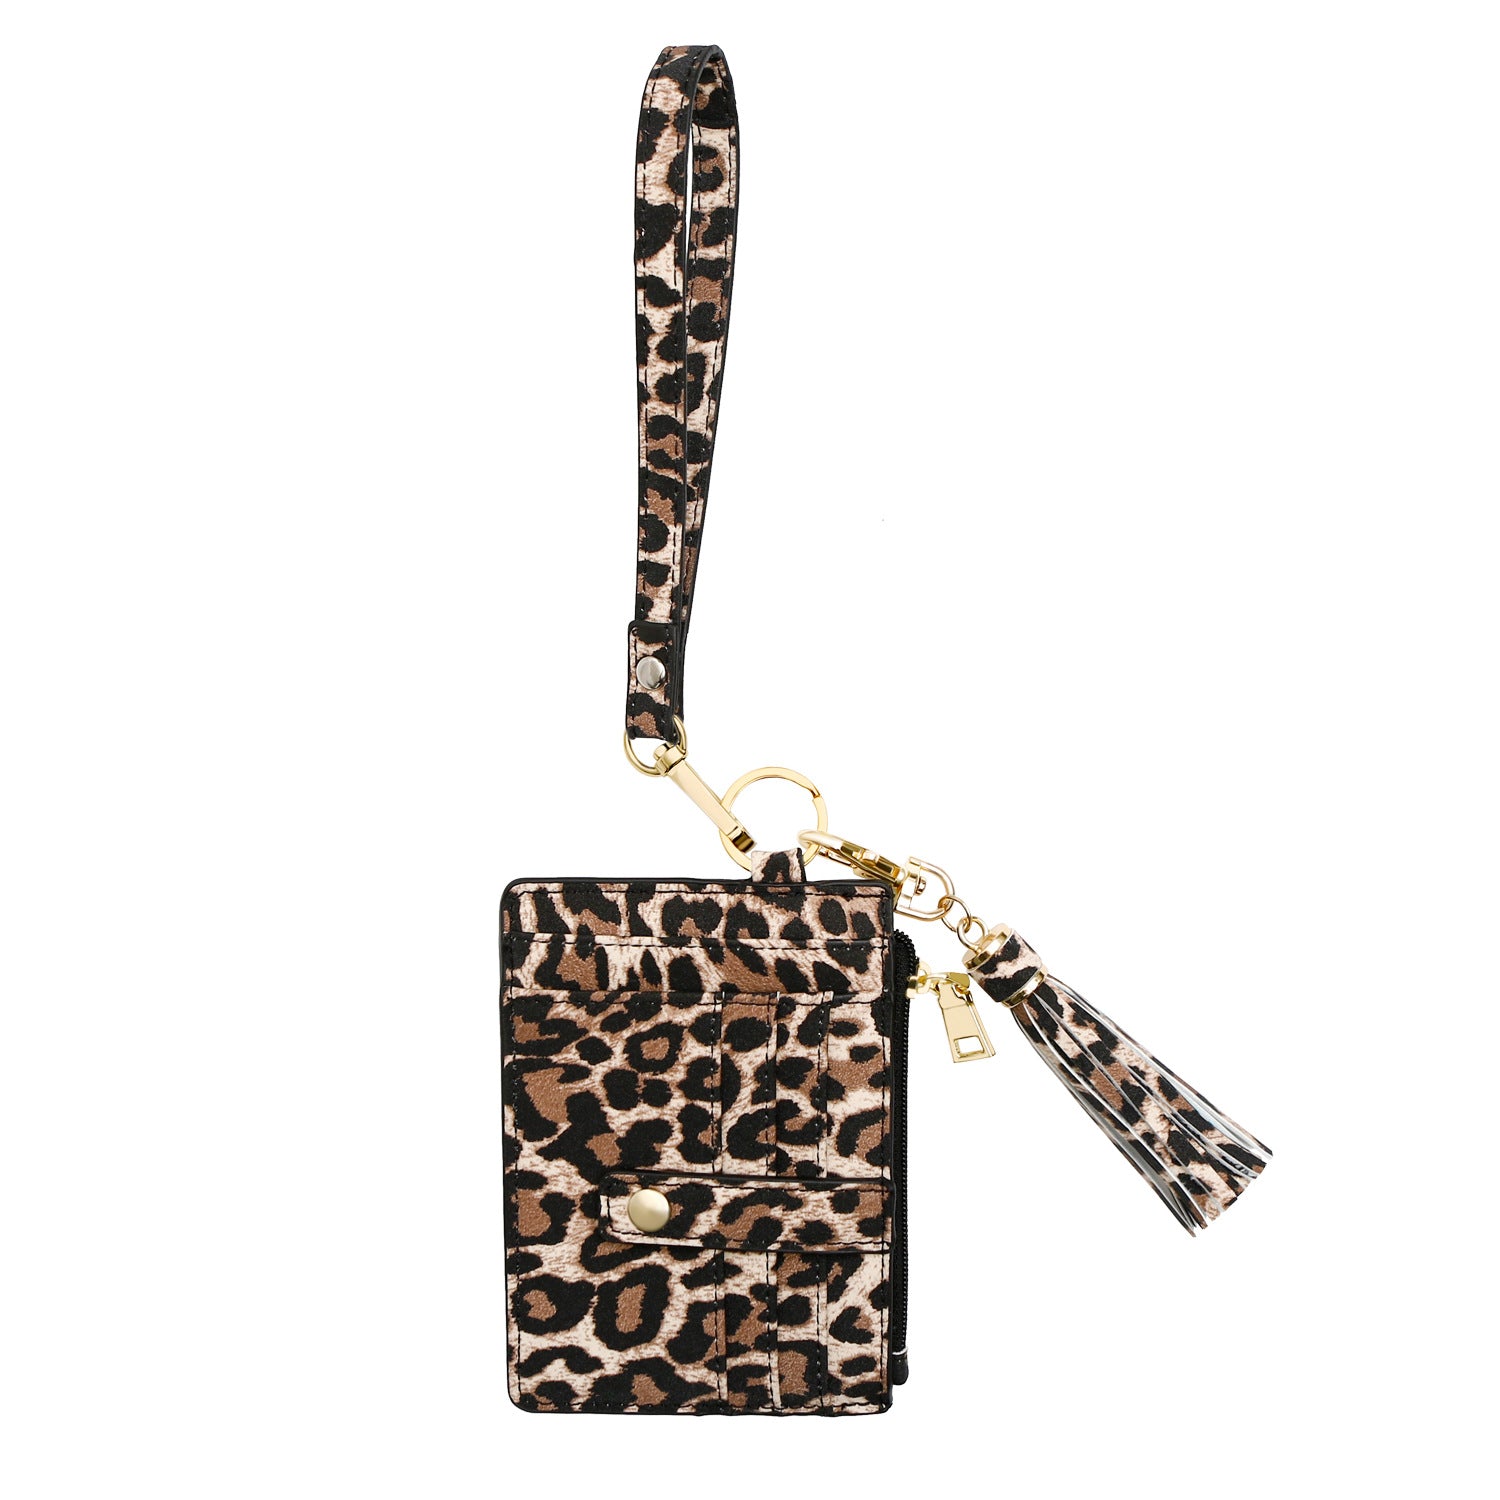 Wholesale Leopard Print Leather Coin Purse Card Holder Wrist Keychain